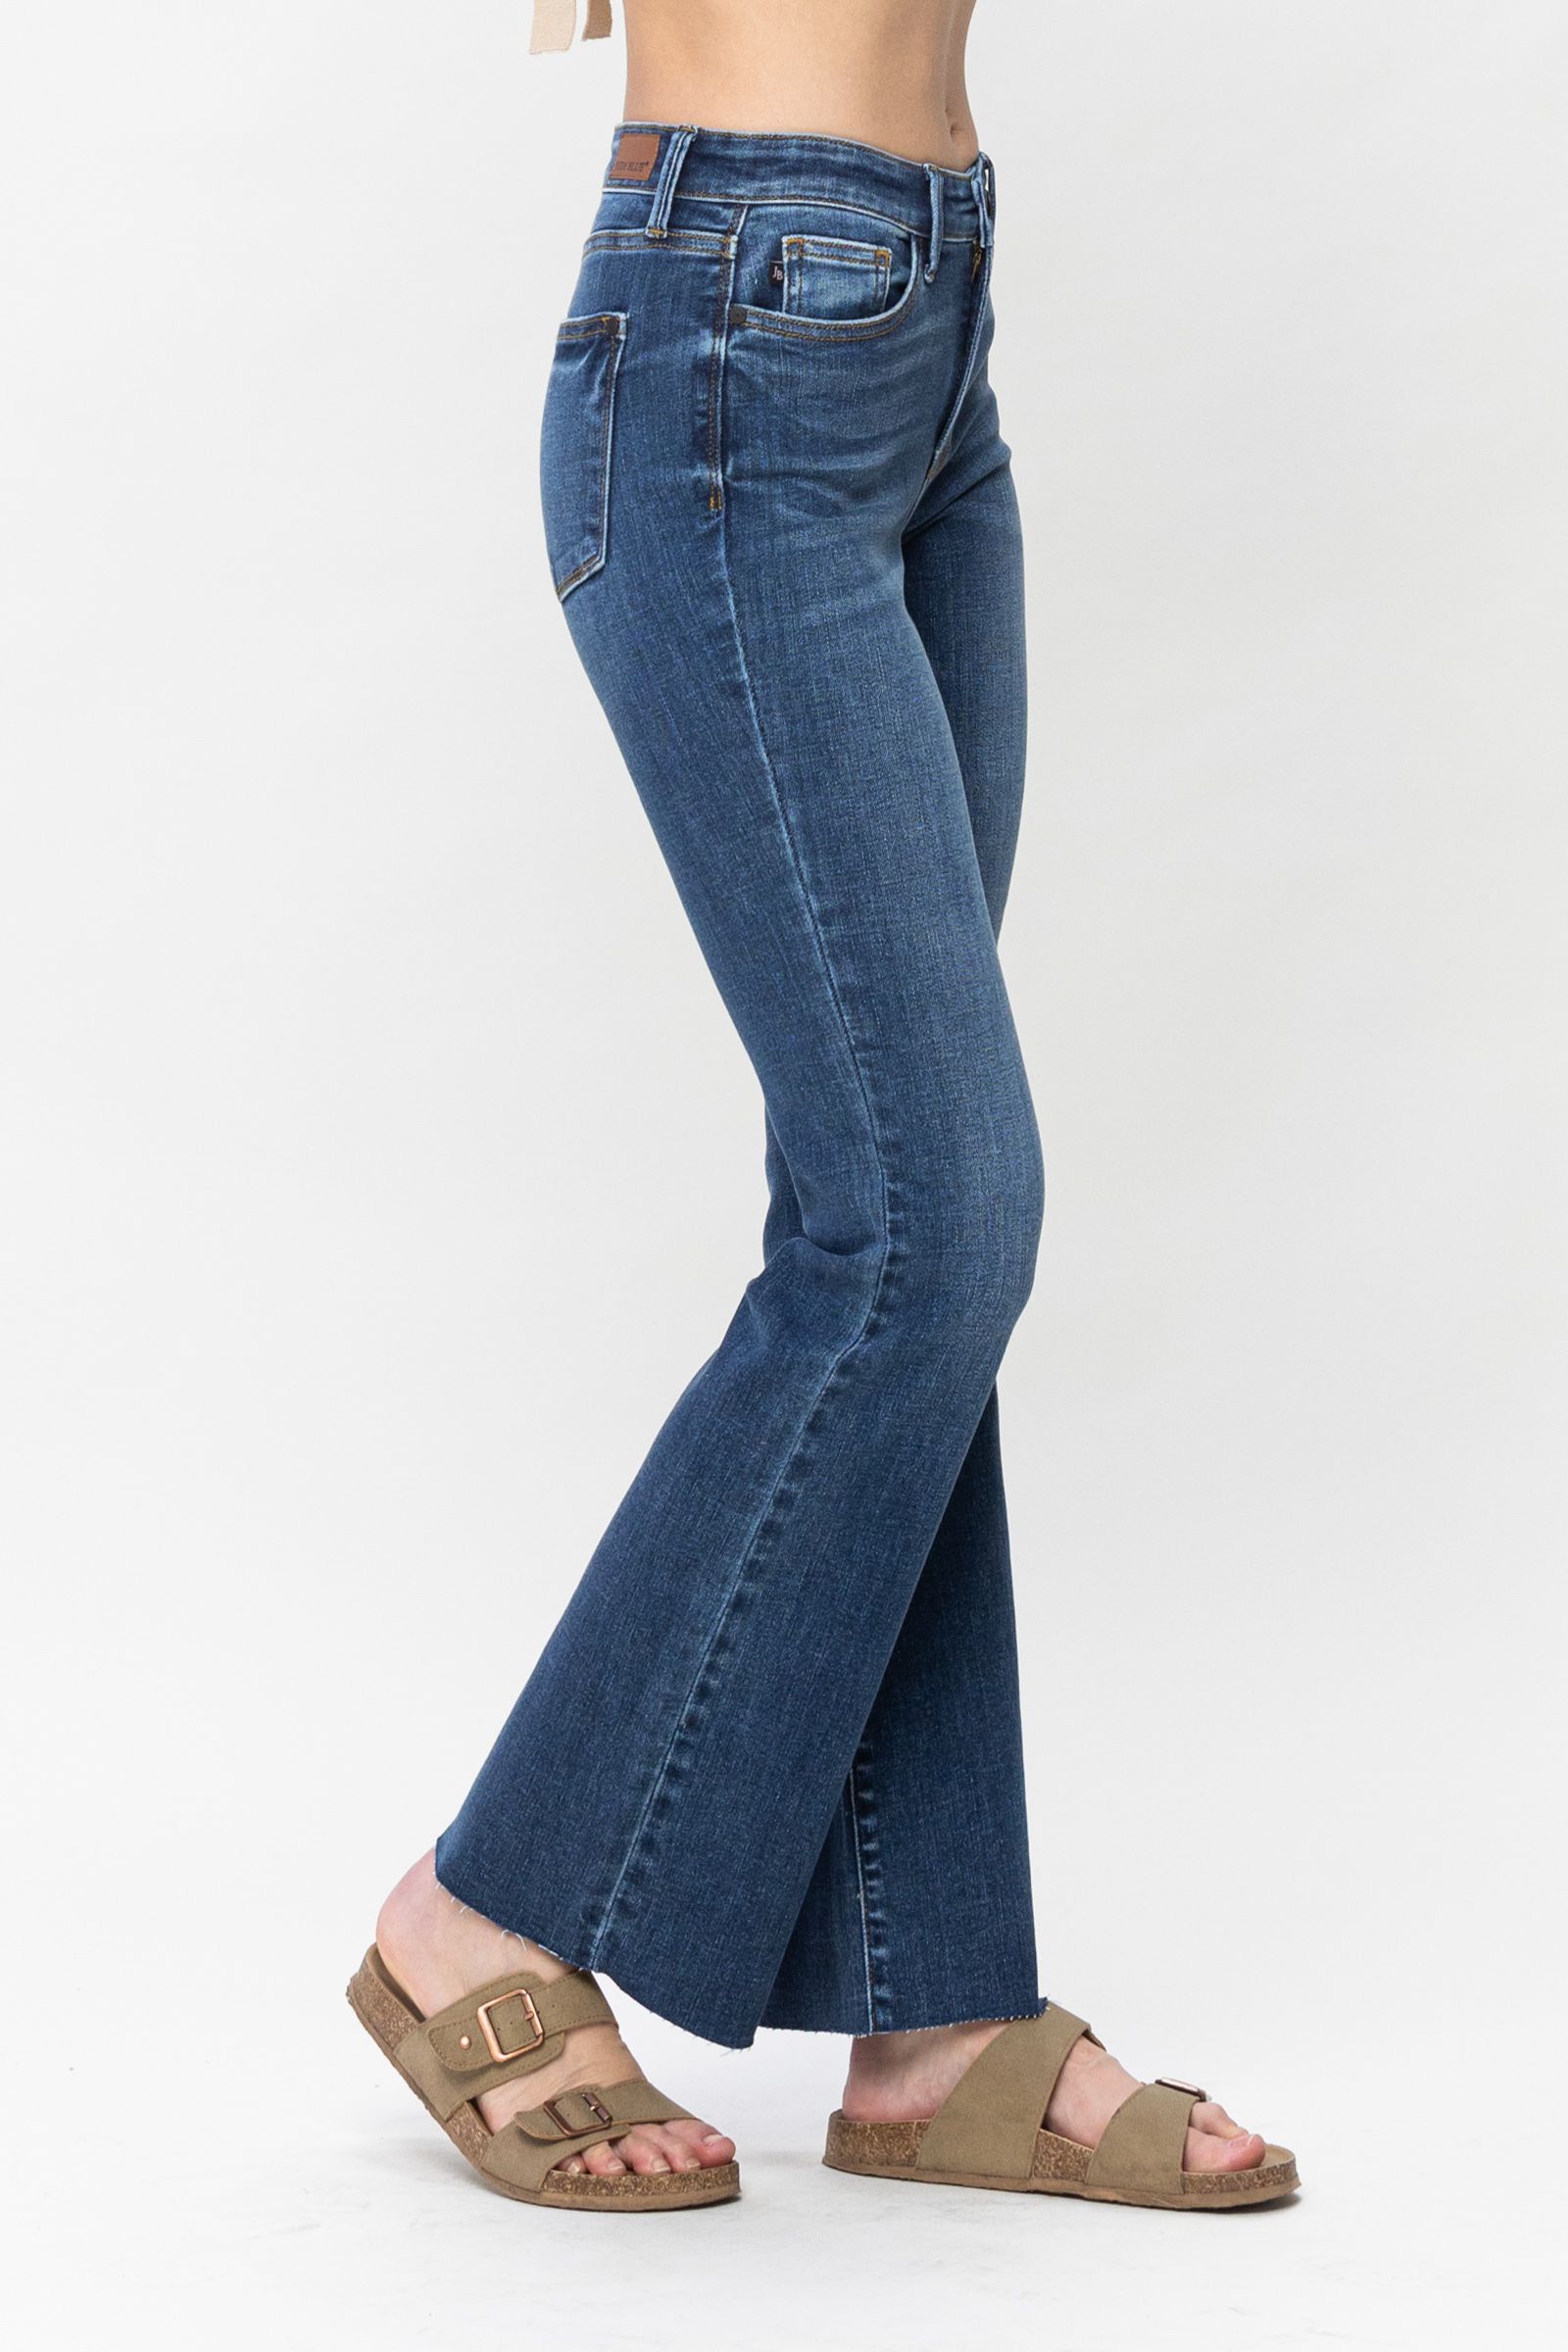 Judy Blue Mid Rise Harsh Contrast Wash and Cut Hem Bootcut - Curvy Size